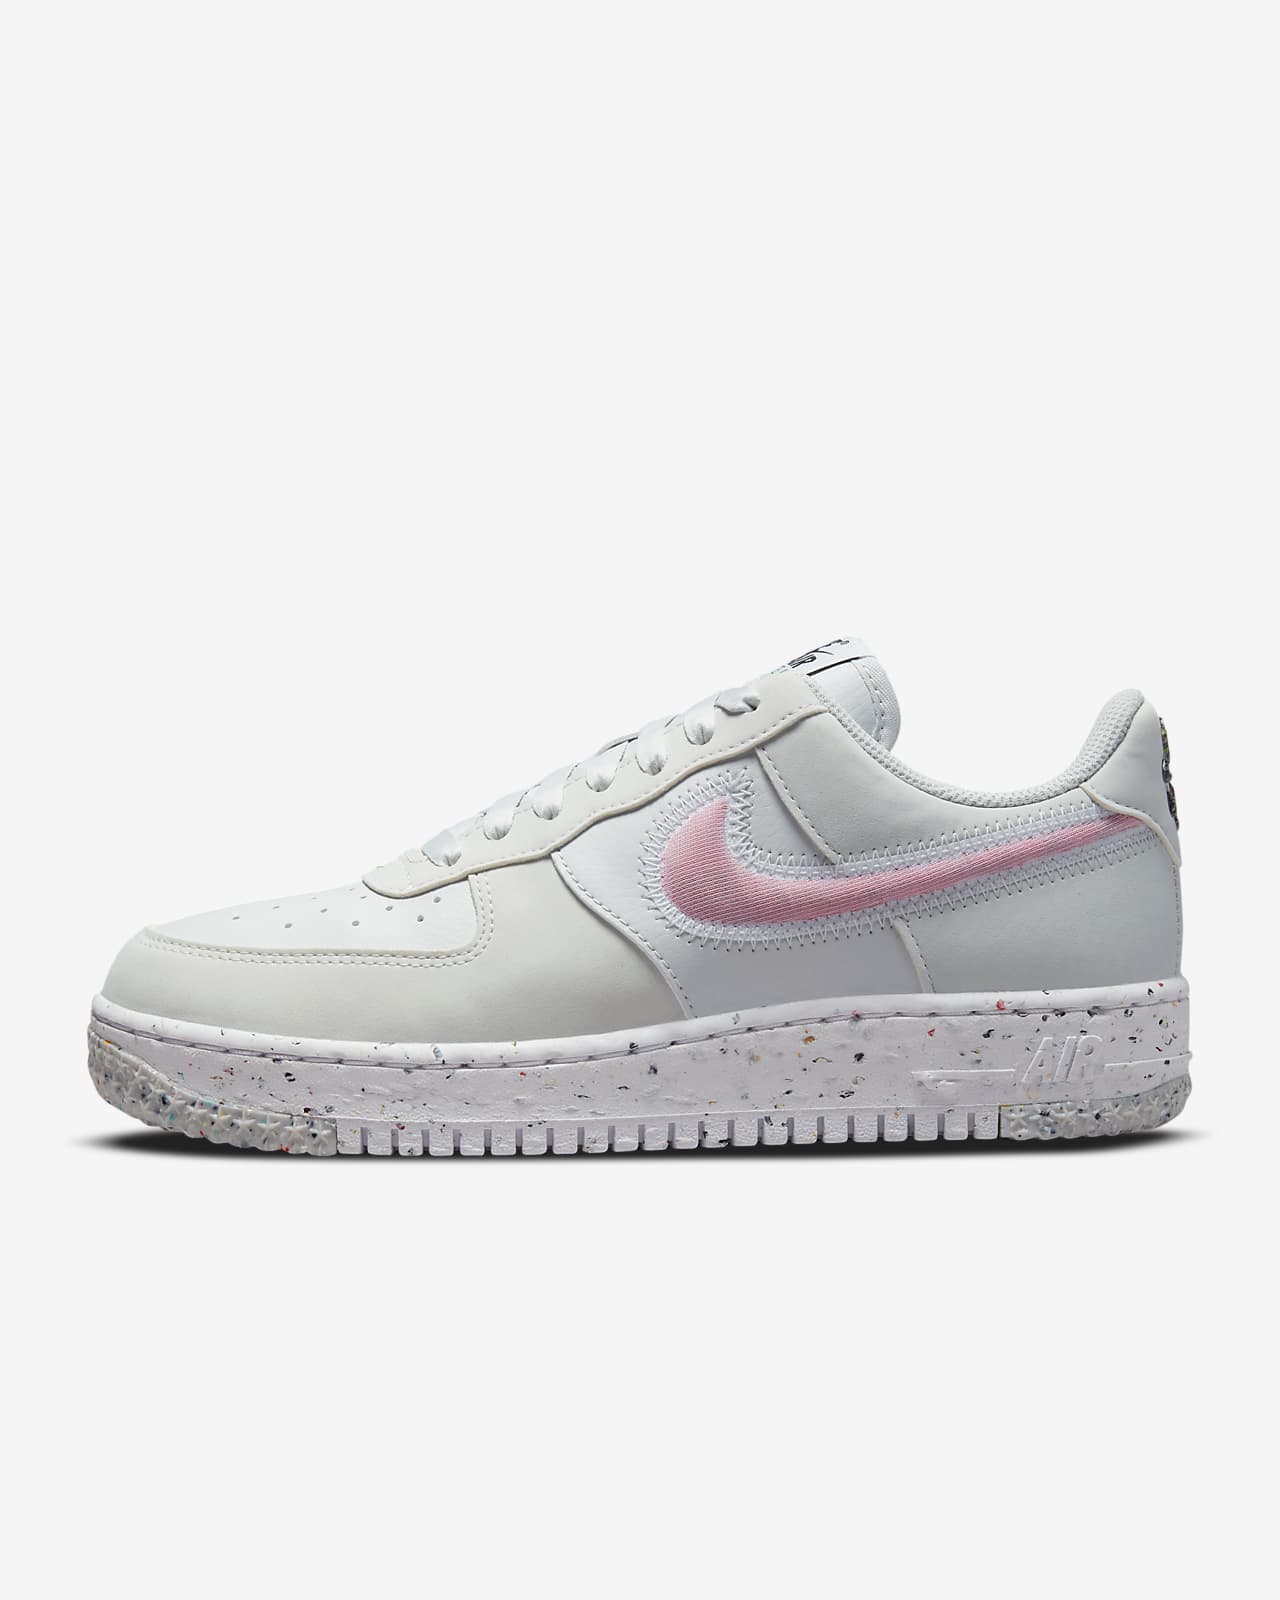 Nike Air Force 1 Crater Women's Shoes